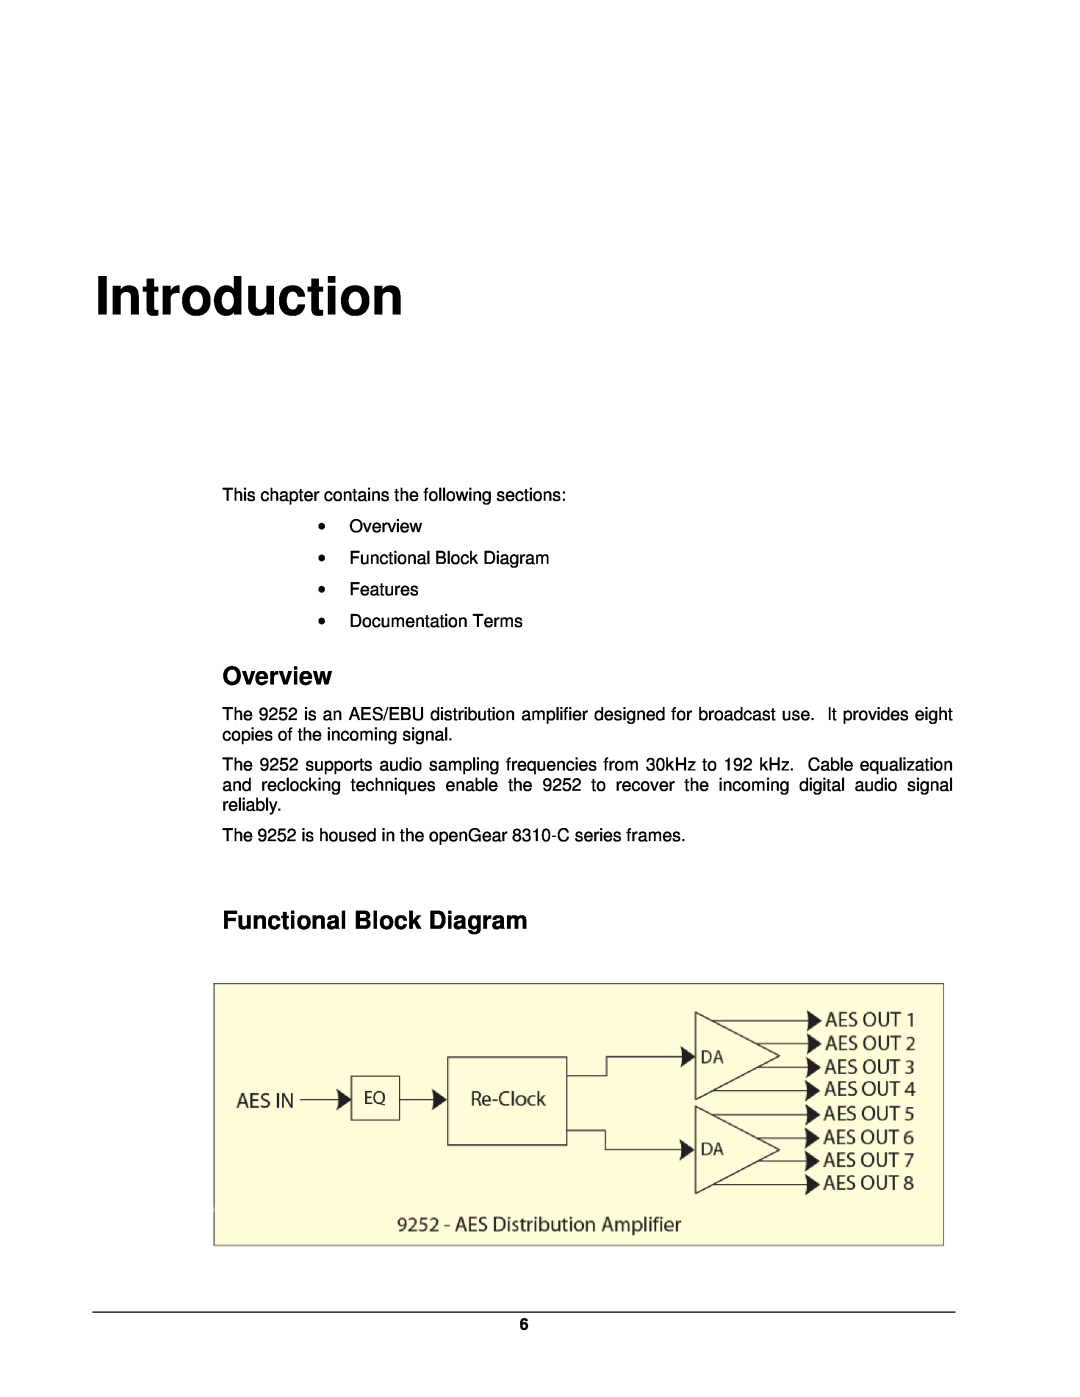 Cobalt Networks 9252 user manual Overview, Functional Block Diagram, Introduction 